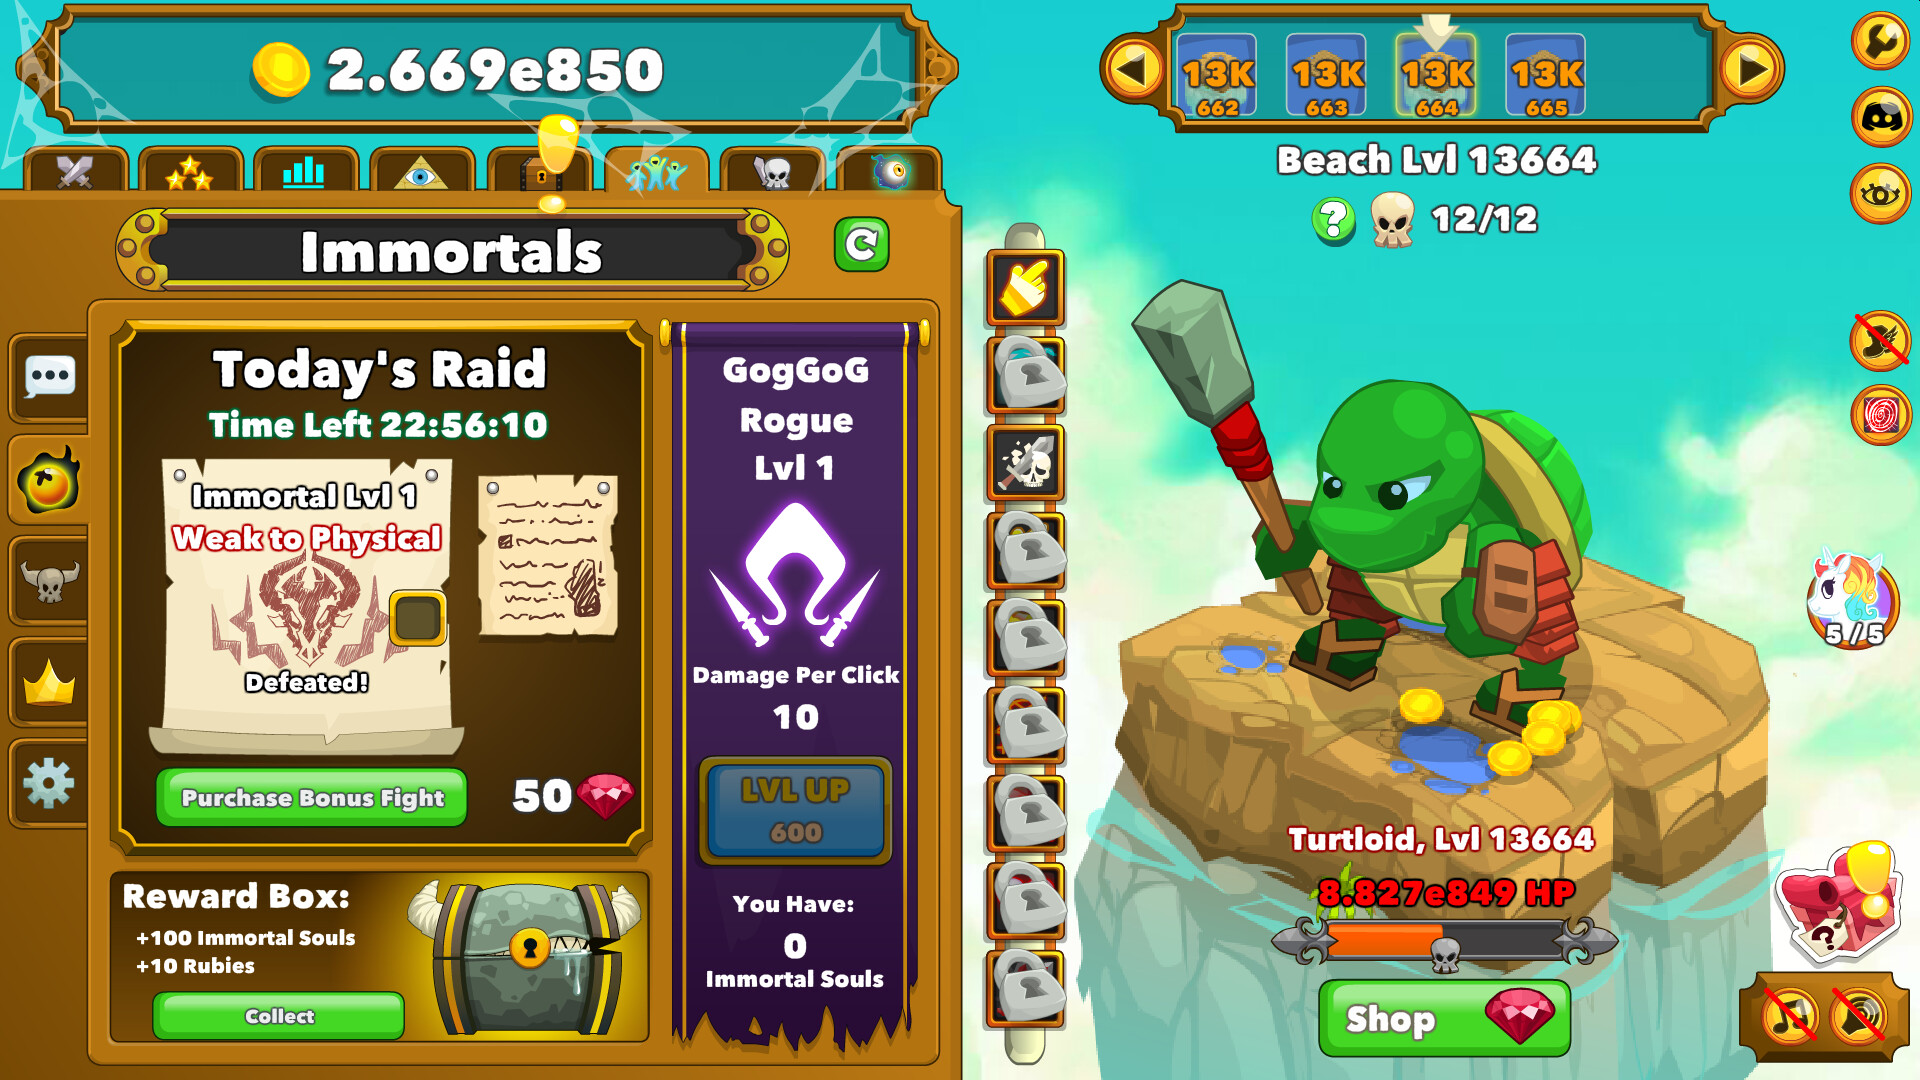 Yes, You Can Now Play Clicker Heroes On Steam - Game Informer